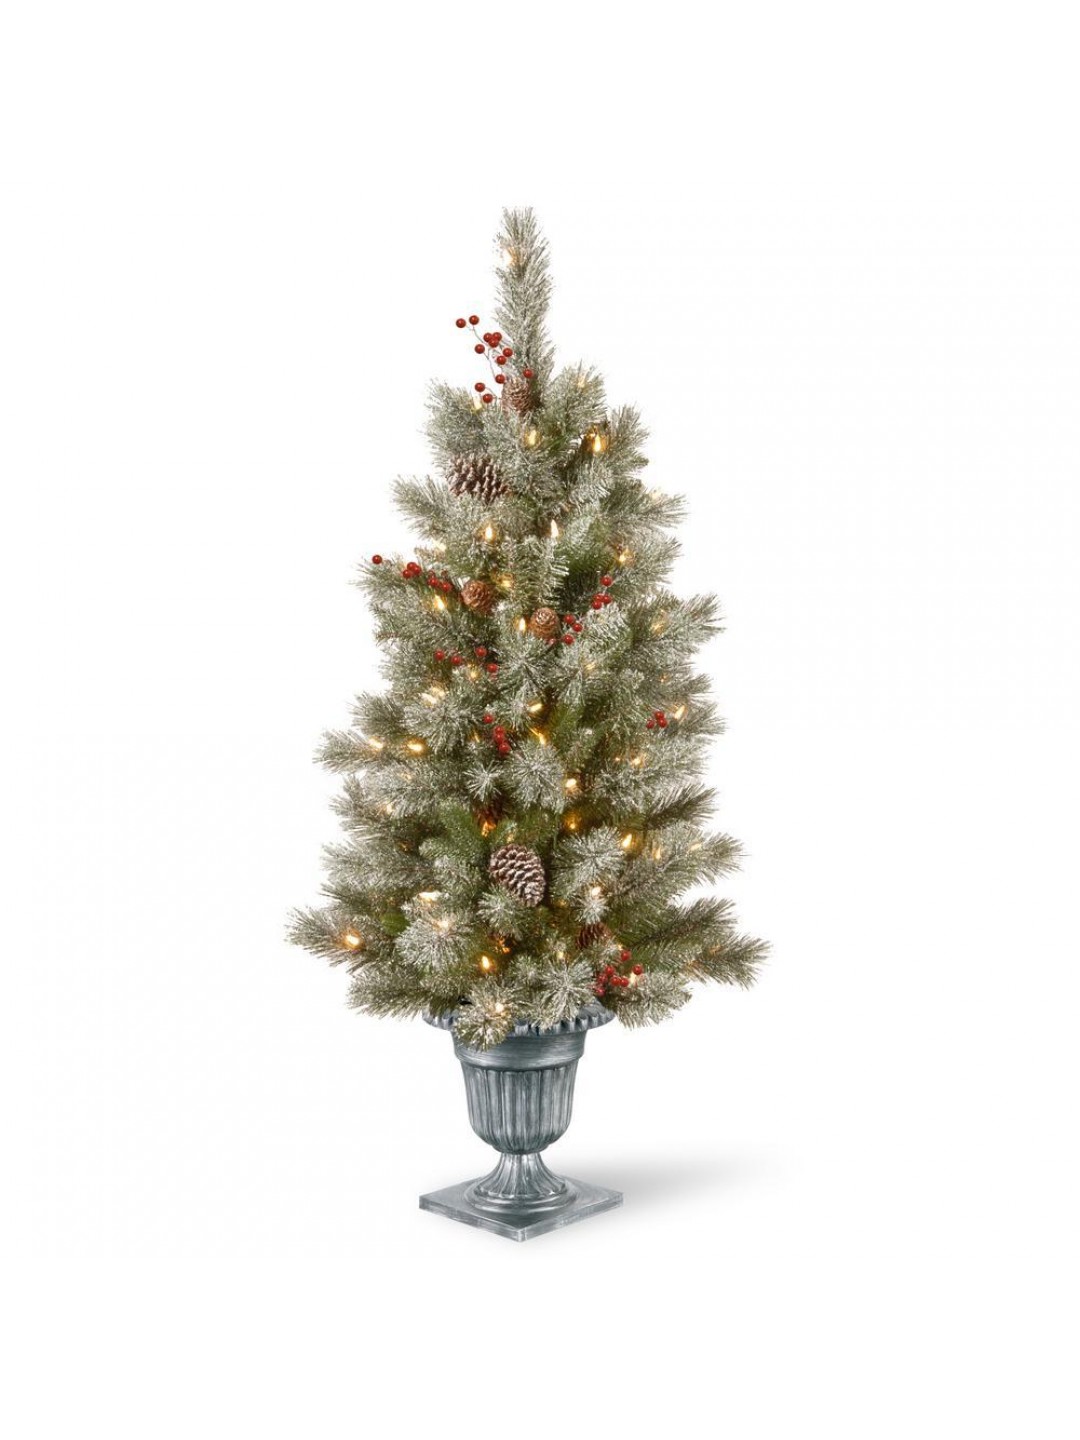 4 ft. Feel Real Snowy Bristle Berry Entrance Tree in Silver Brushed Urn with Red Berries, Mixed Cones and 100 Clear Lig